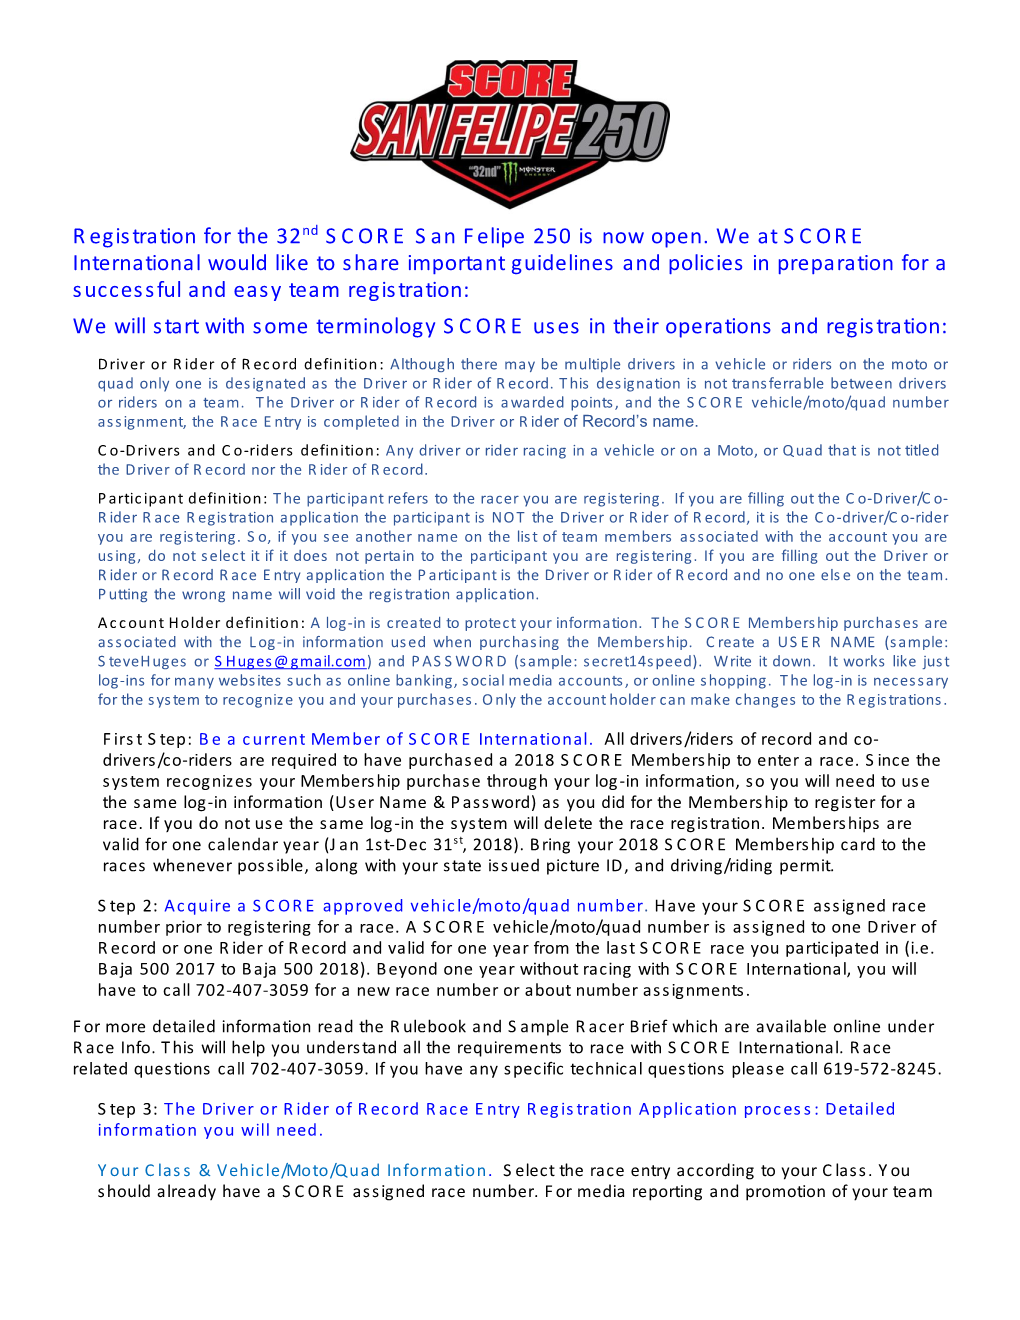 Registration for the 32Nd SCORE San Felipe 250 Is Now Open. We at SCORE International Would Like to Share Important Guidelines A